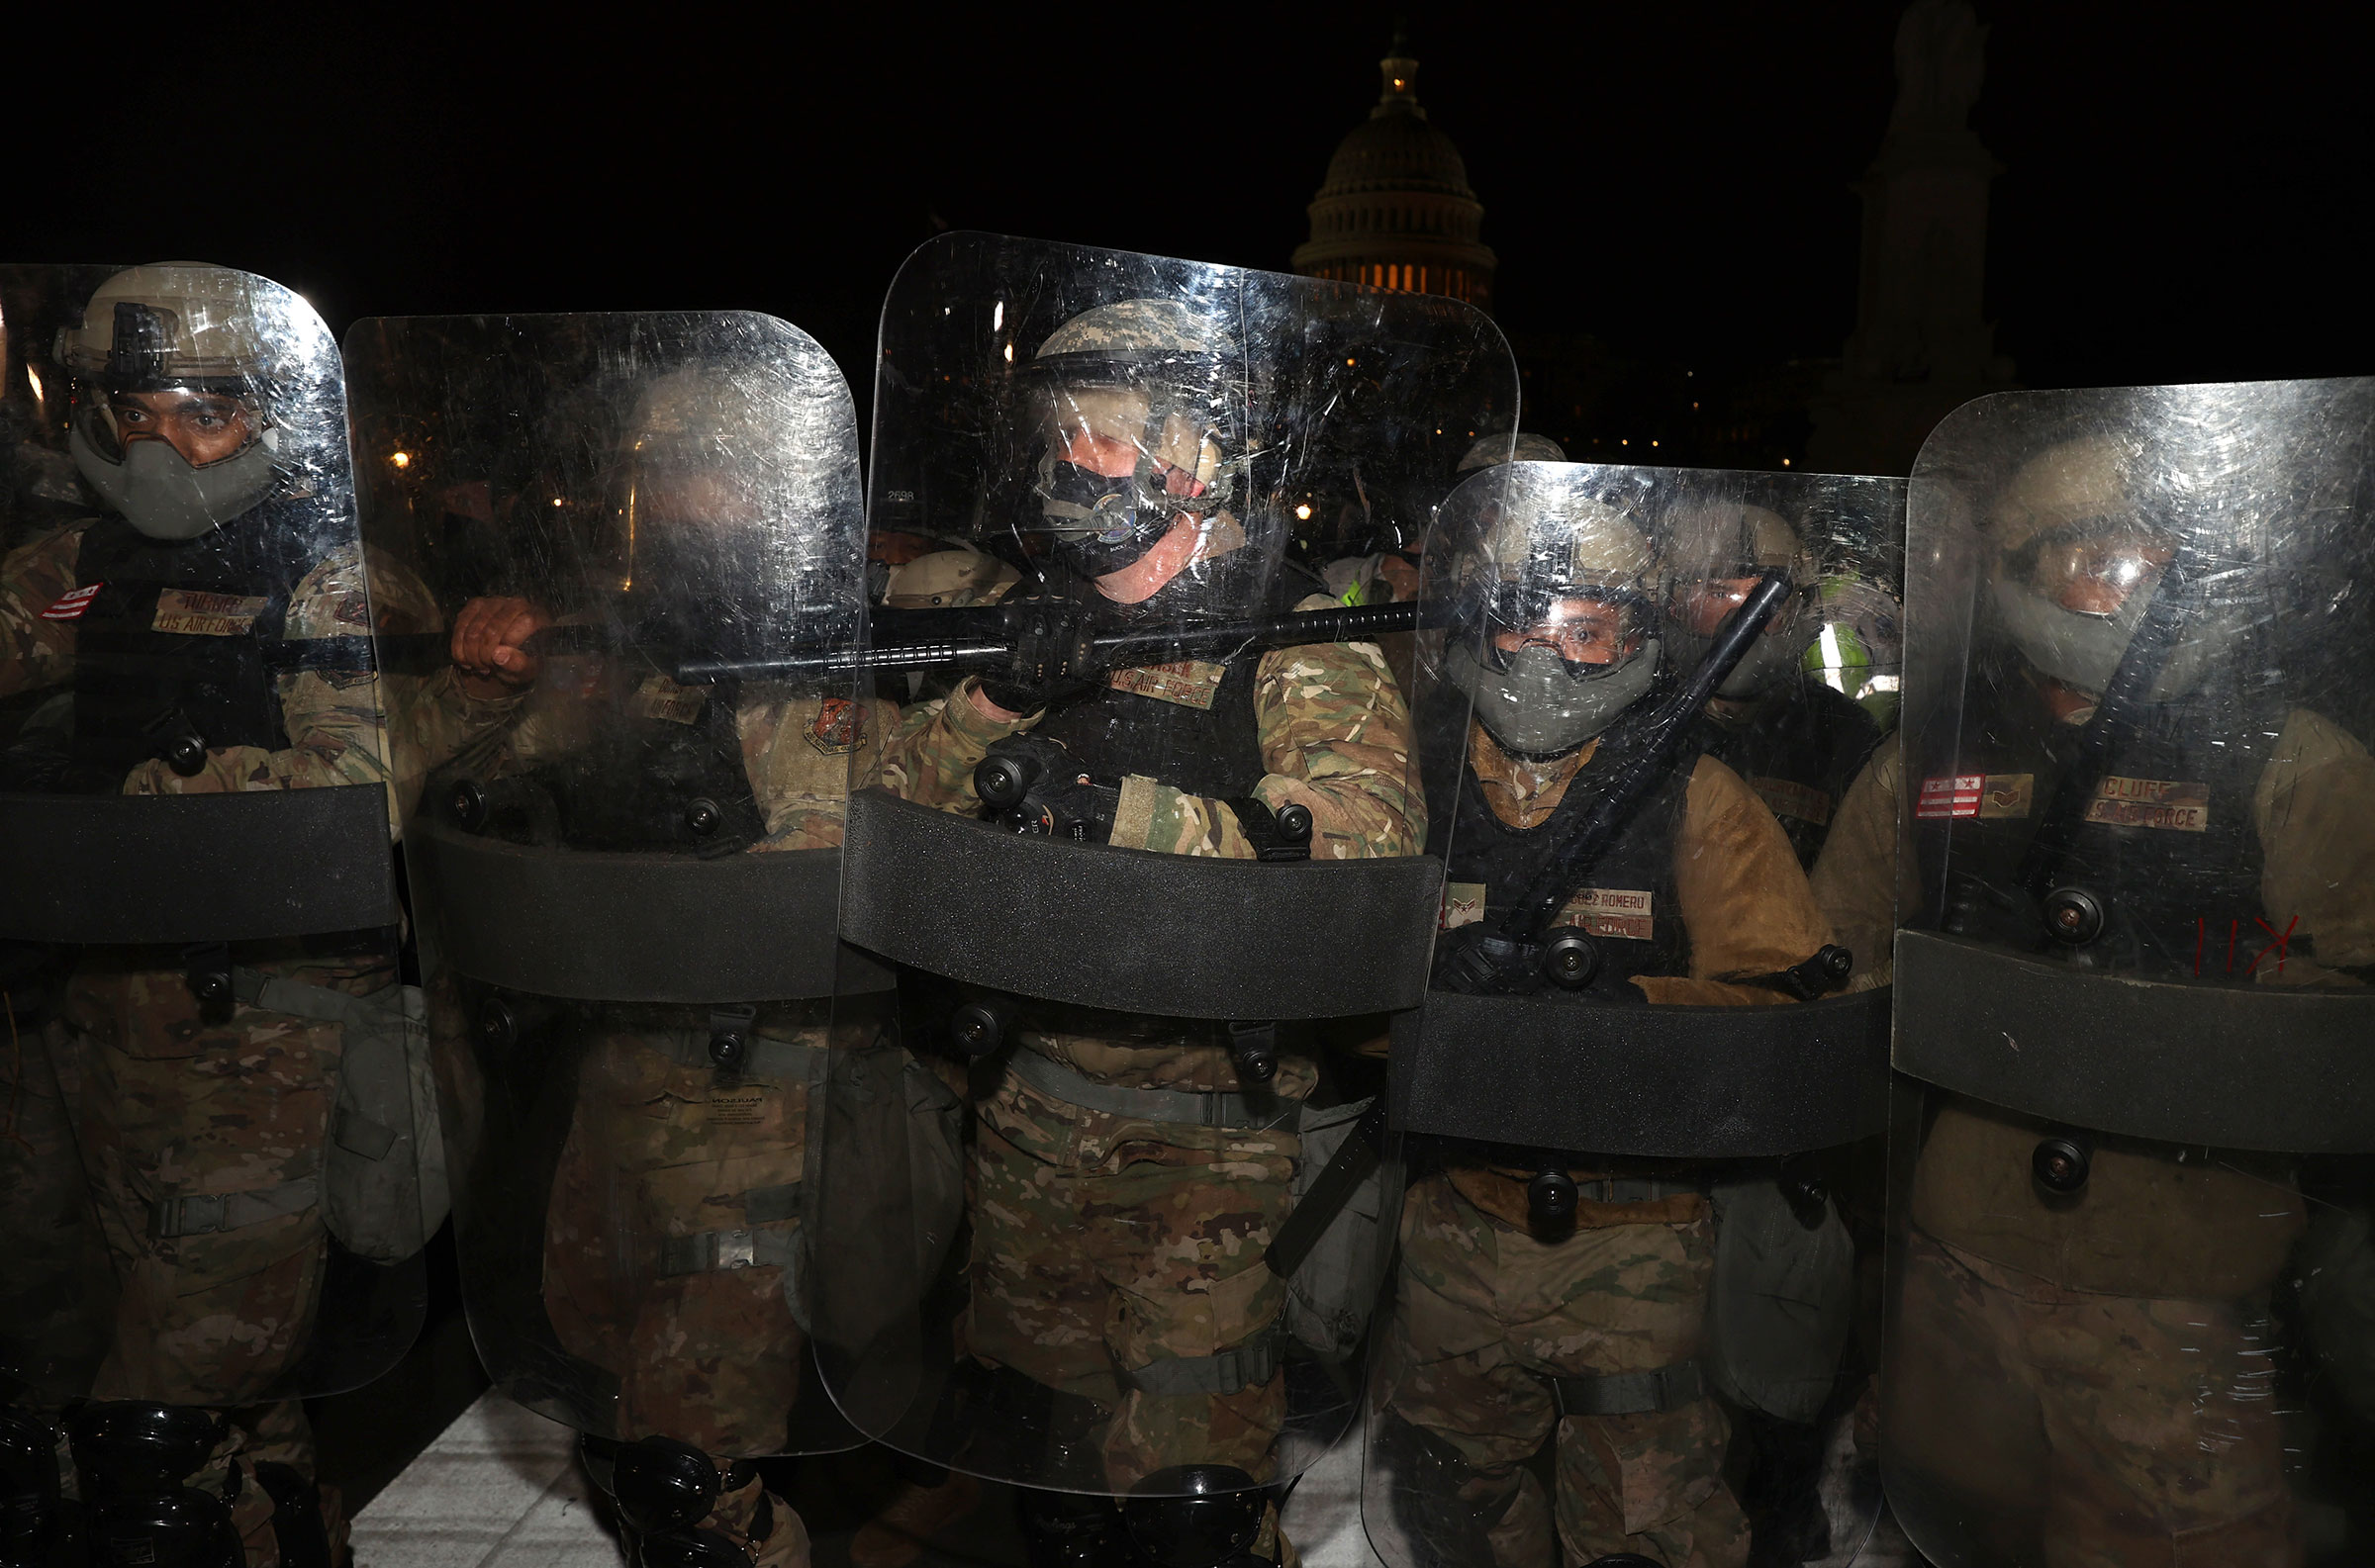 Members of the National Guard assist police officers in dispersing protesters who are gathering at the Capitol Building in Washington, on Jan. 06, 2021.